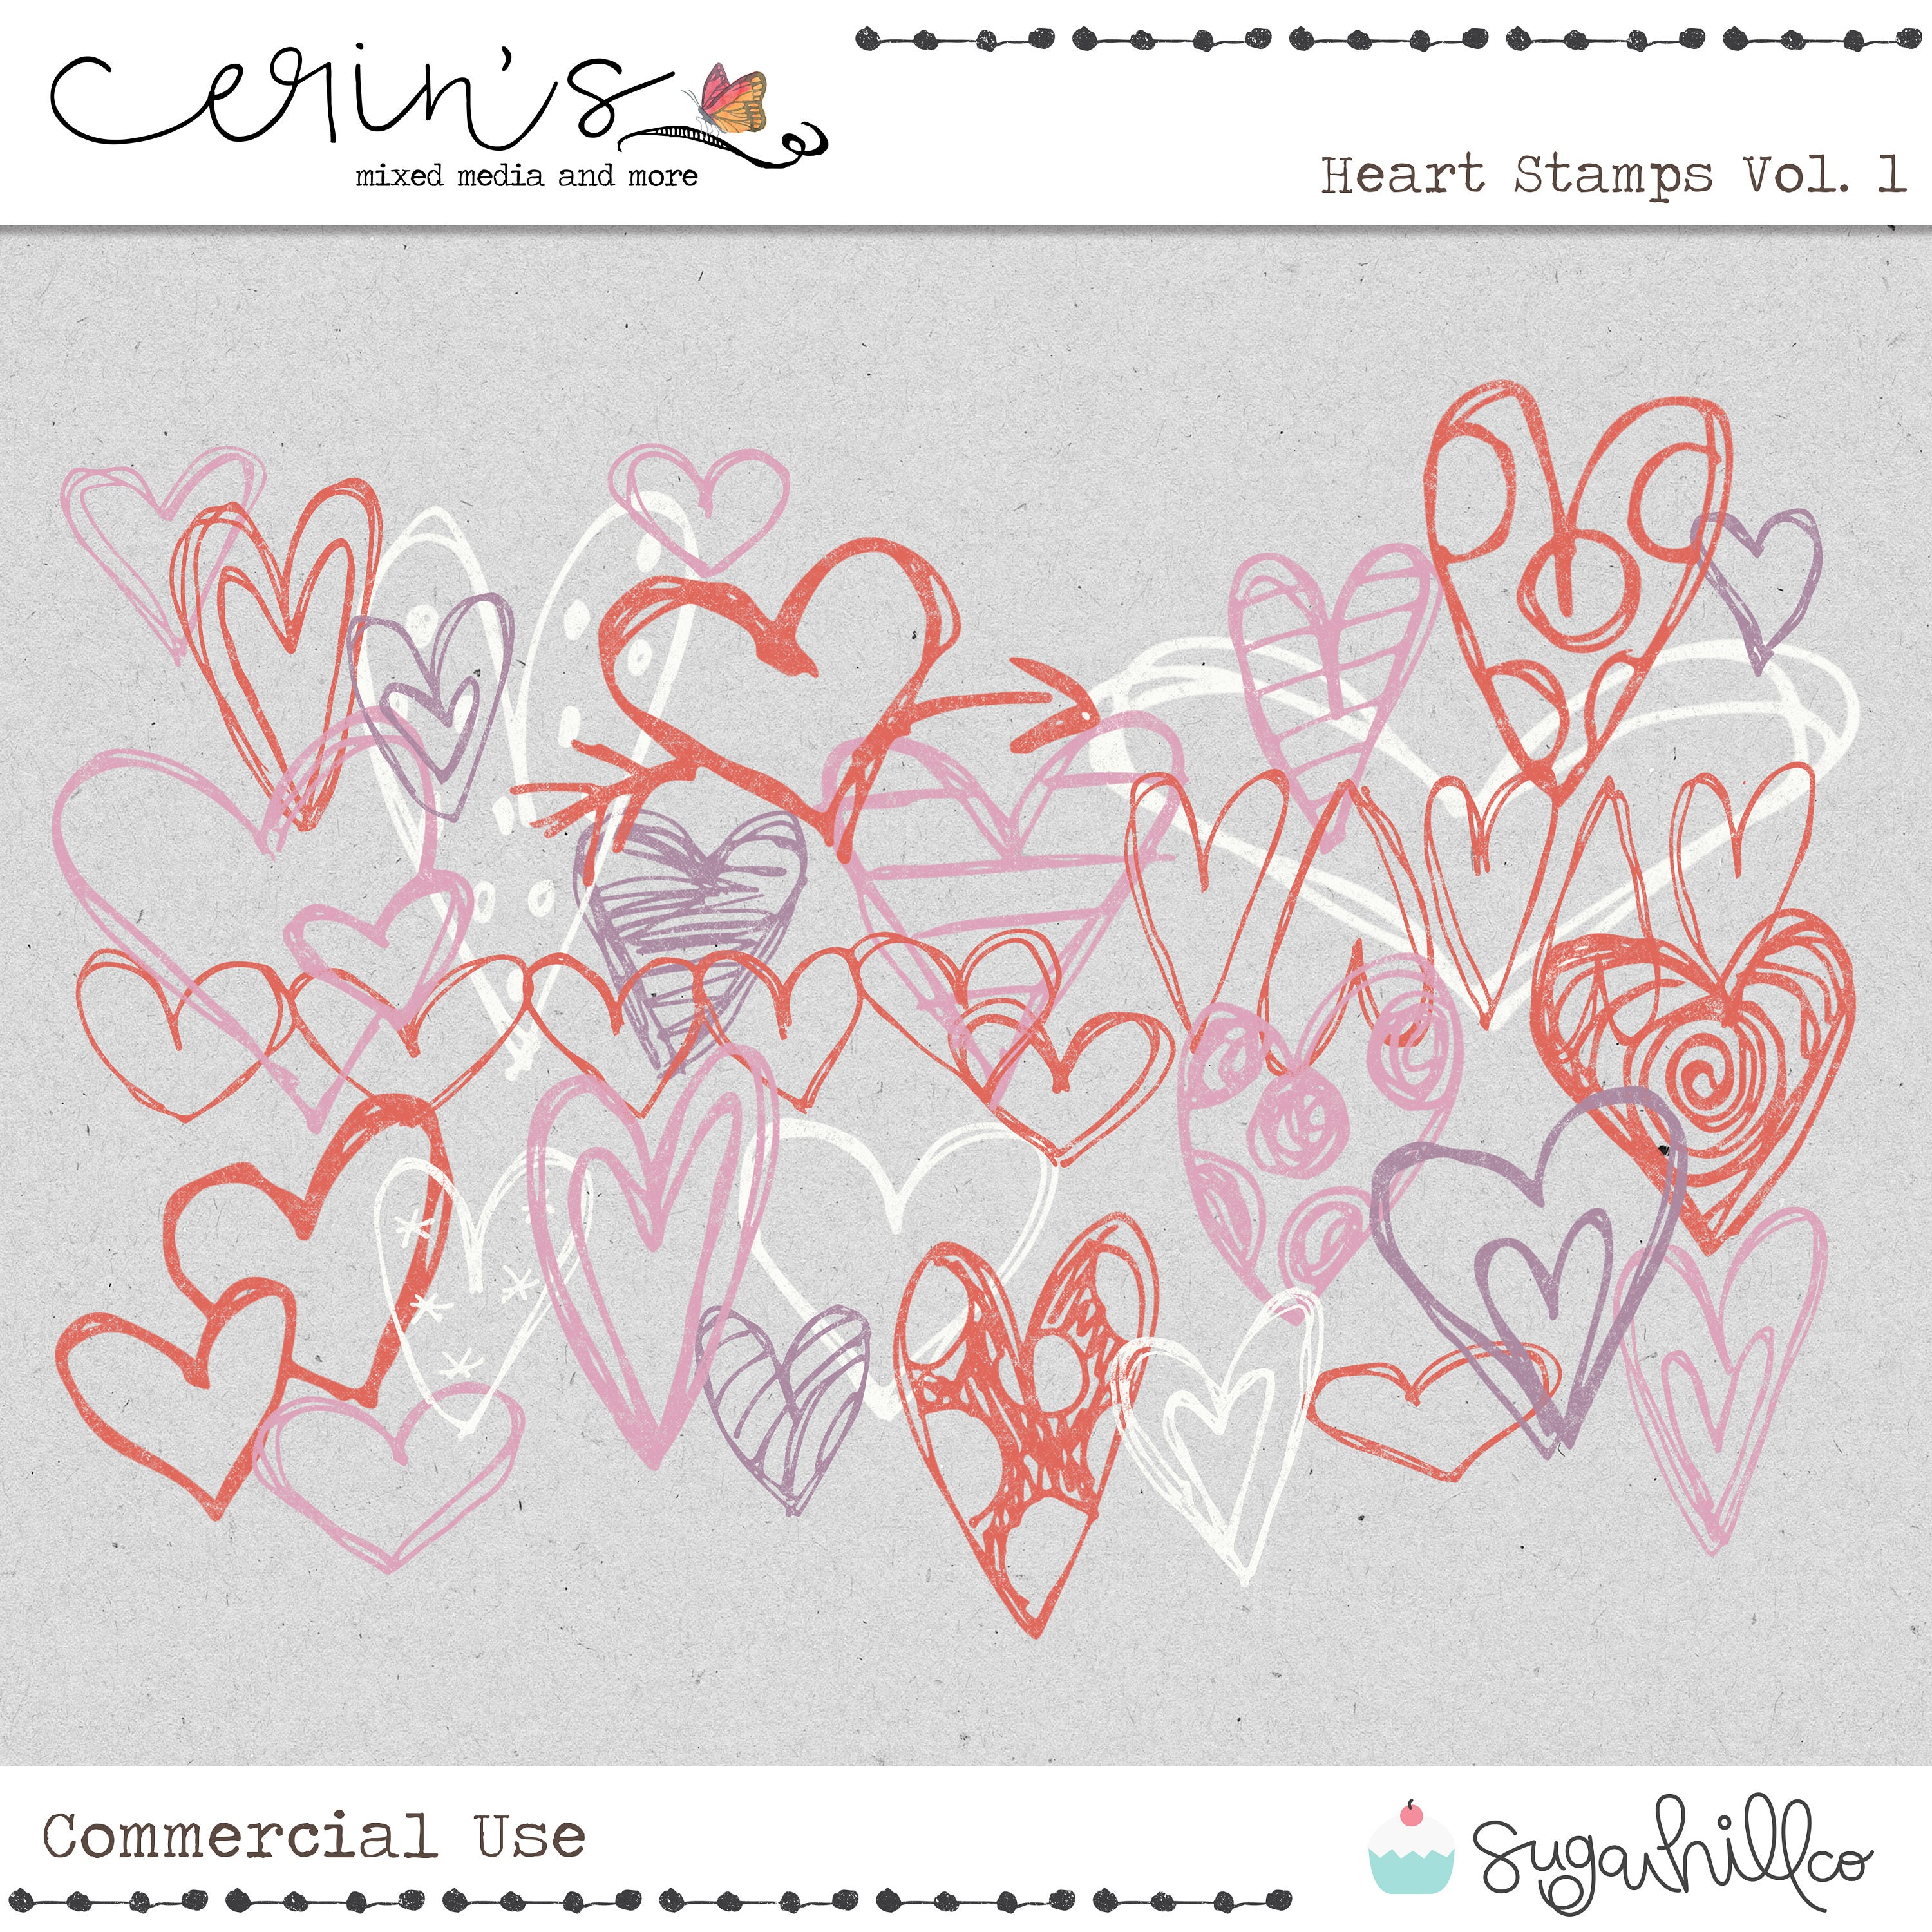 Doodled Heart Stamps and Brushesdigital Junk Journal and Scrapbook  Commercial Use Elementshigh Quality Commercial Usepretty Page Accents 